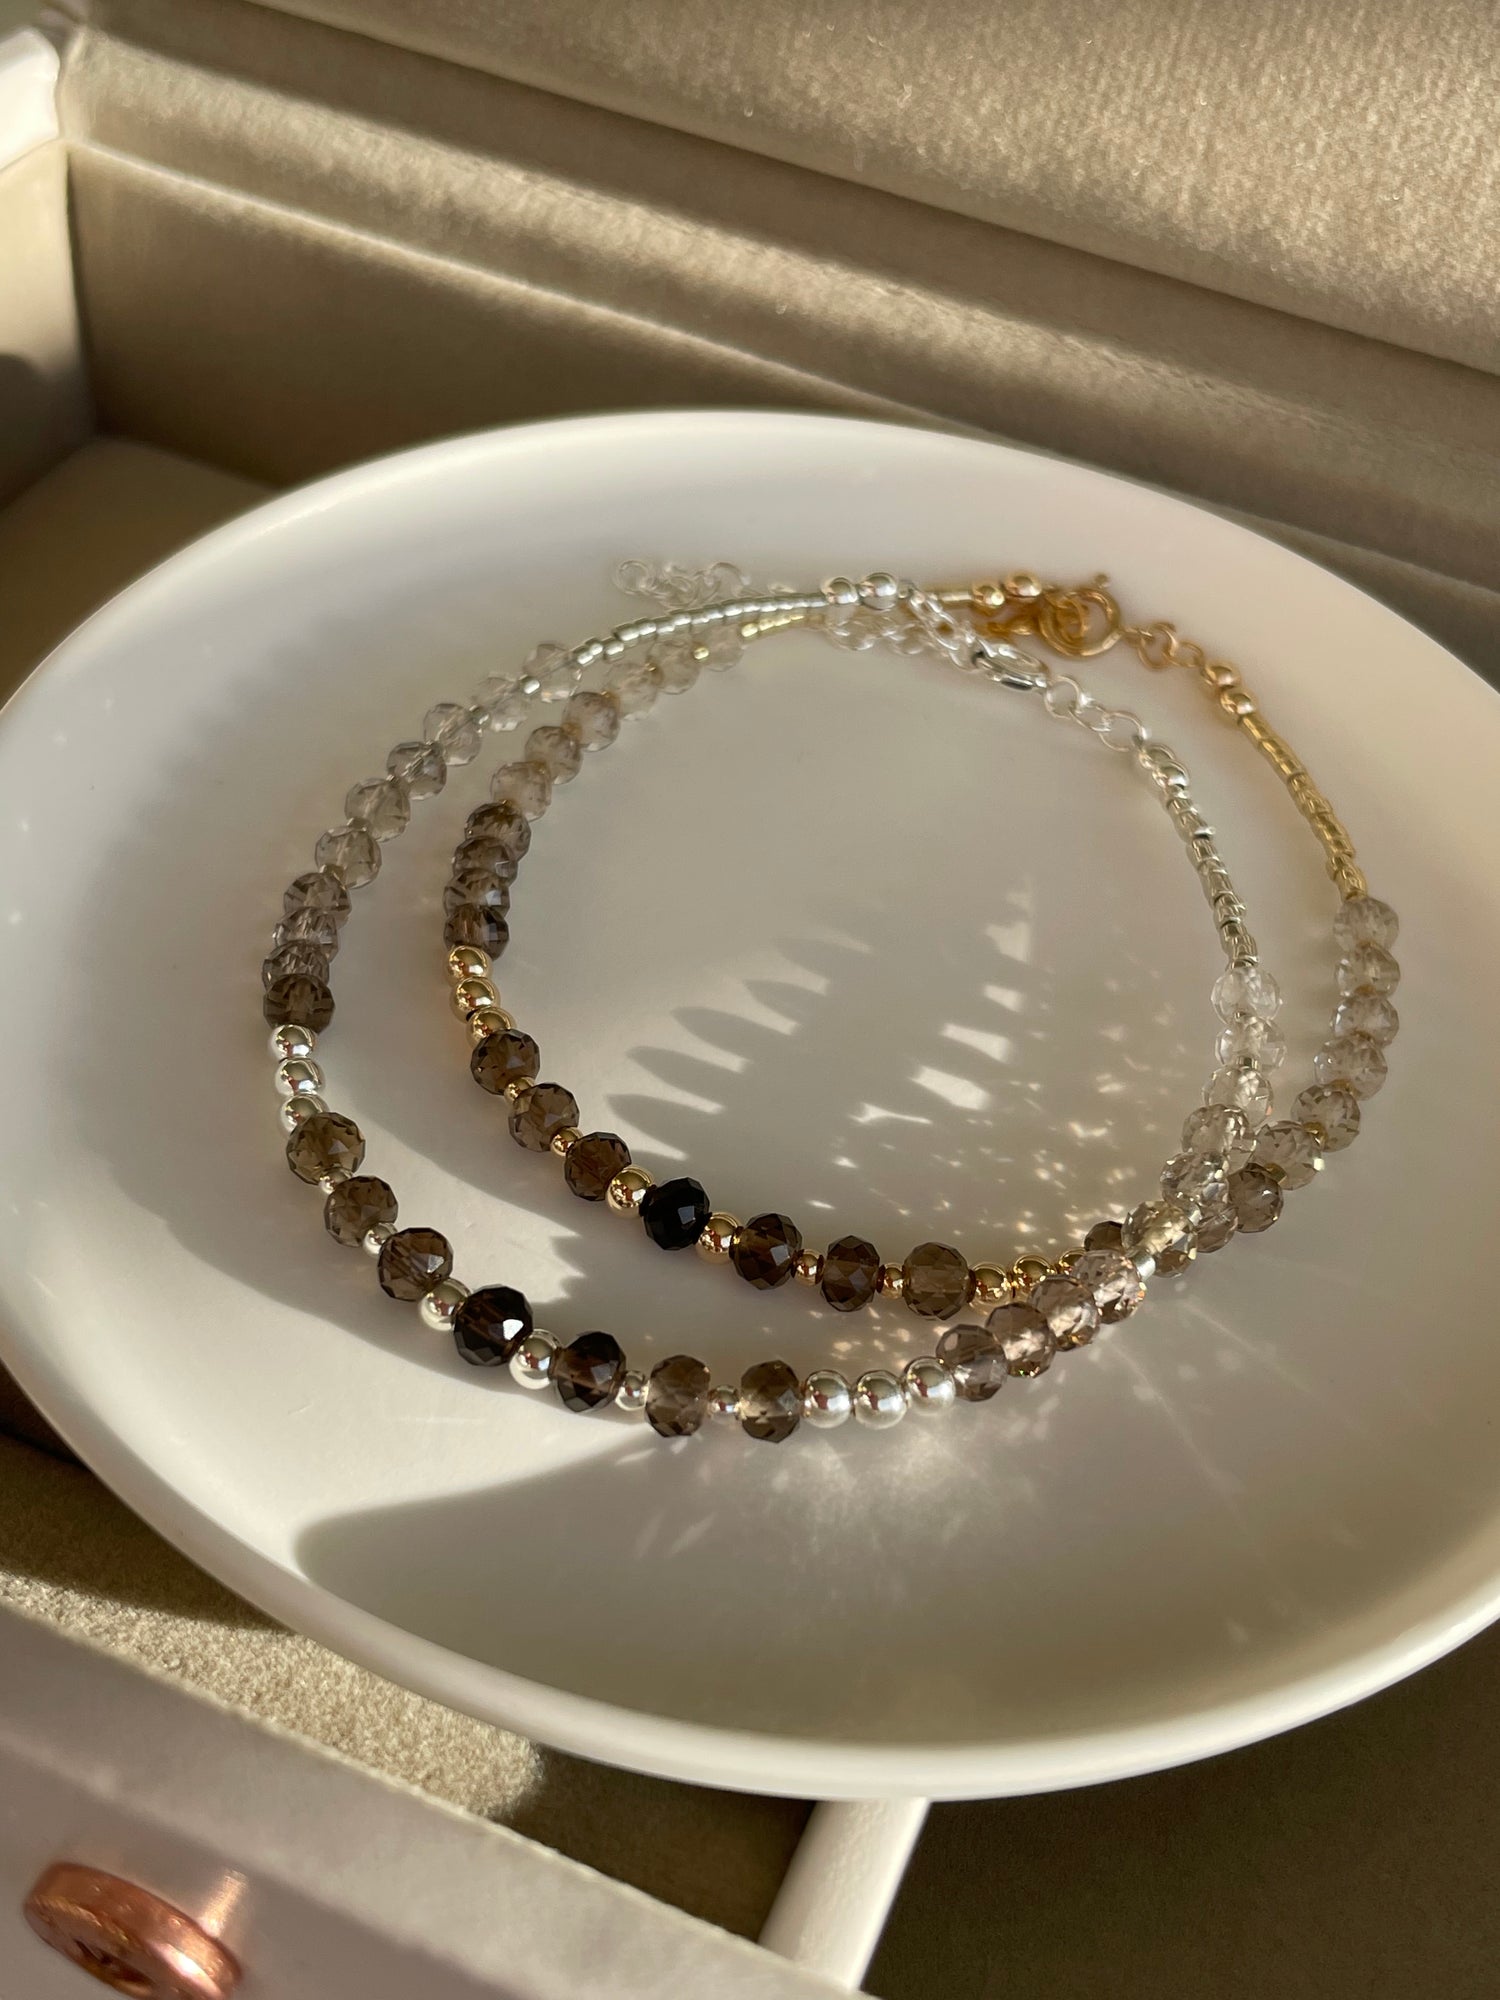 Smoky Quartz crystal bracelet for protection and gounding energies